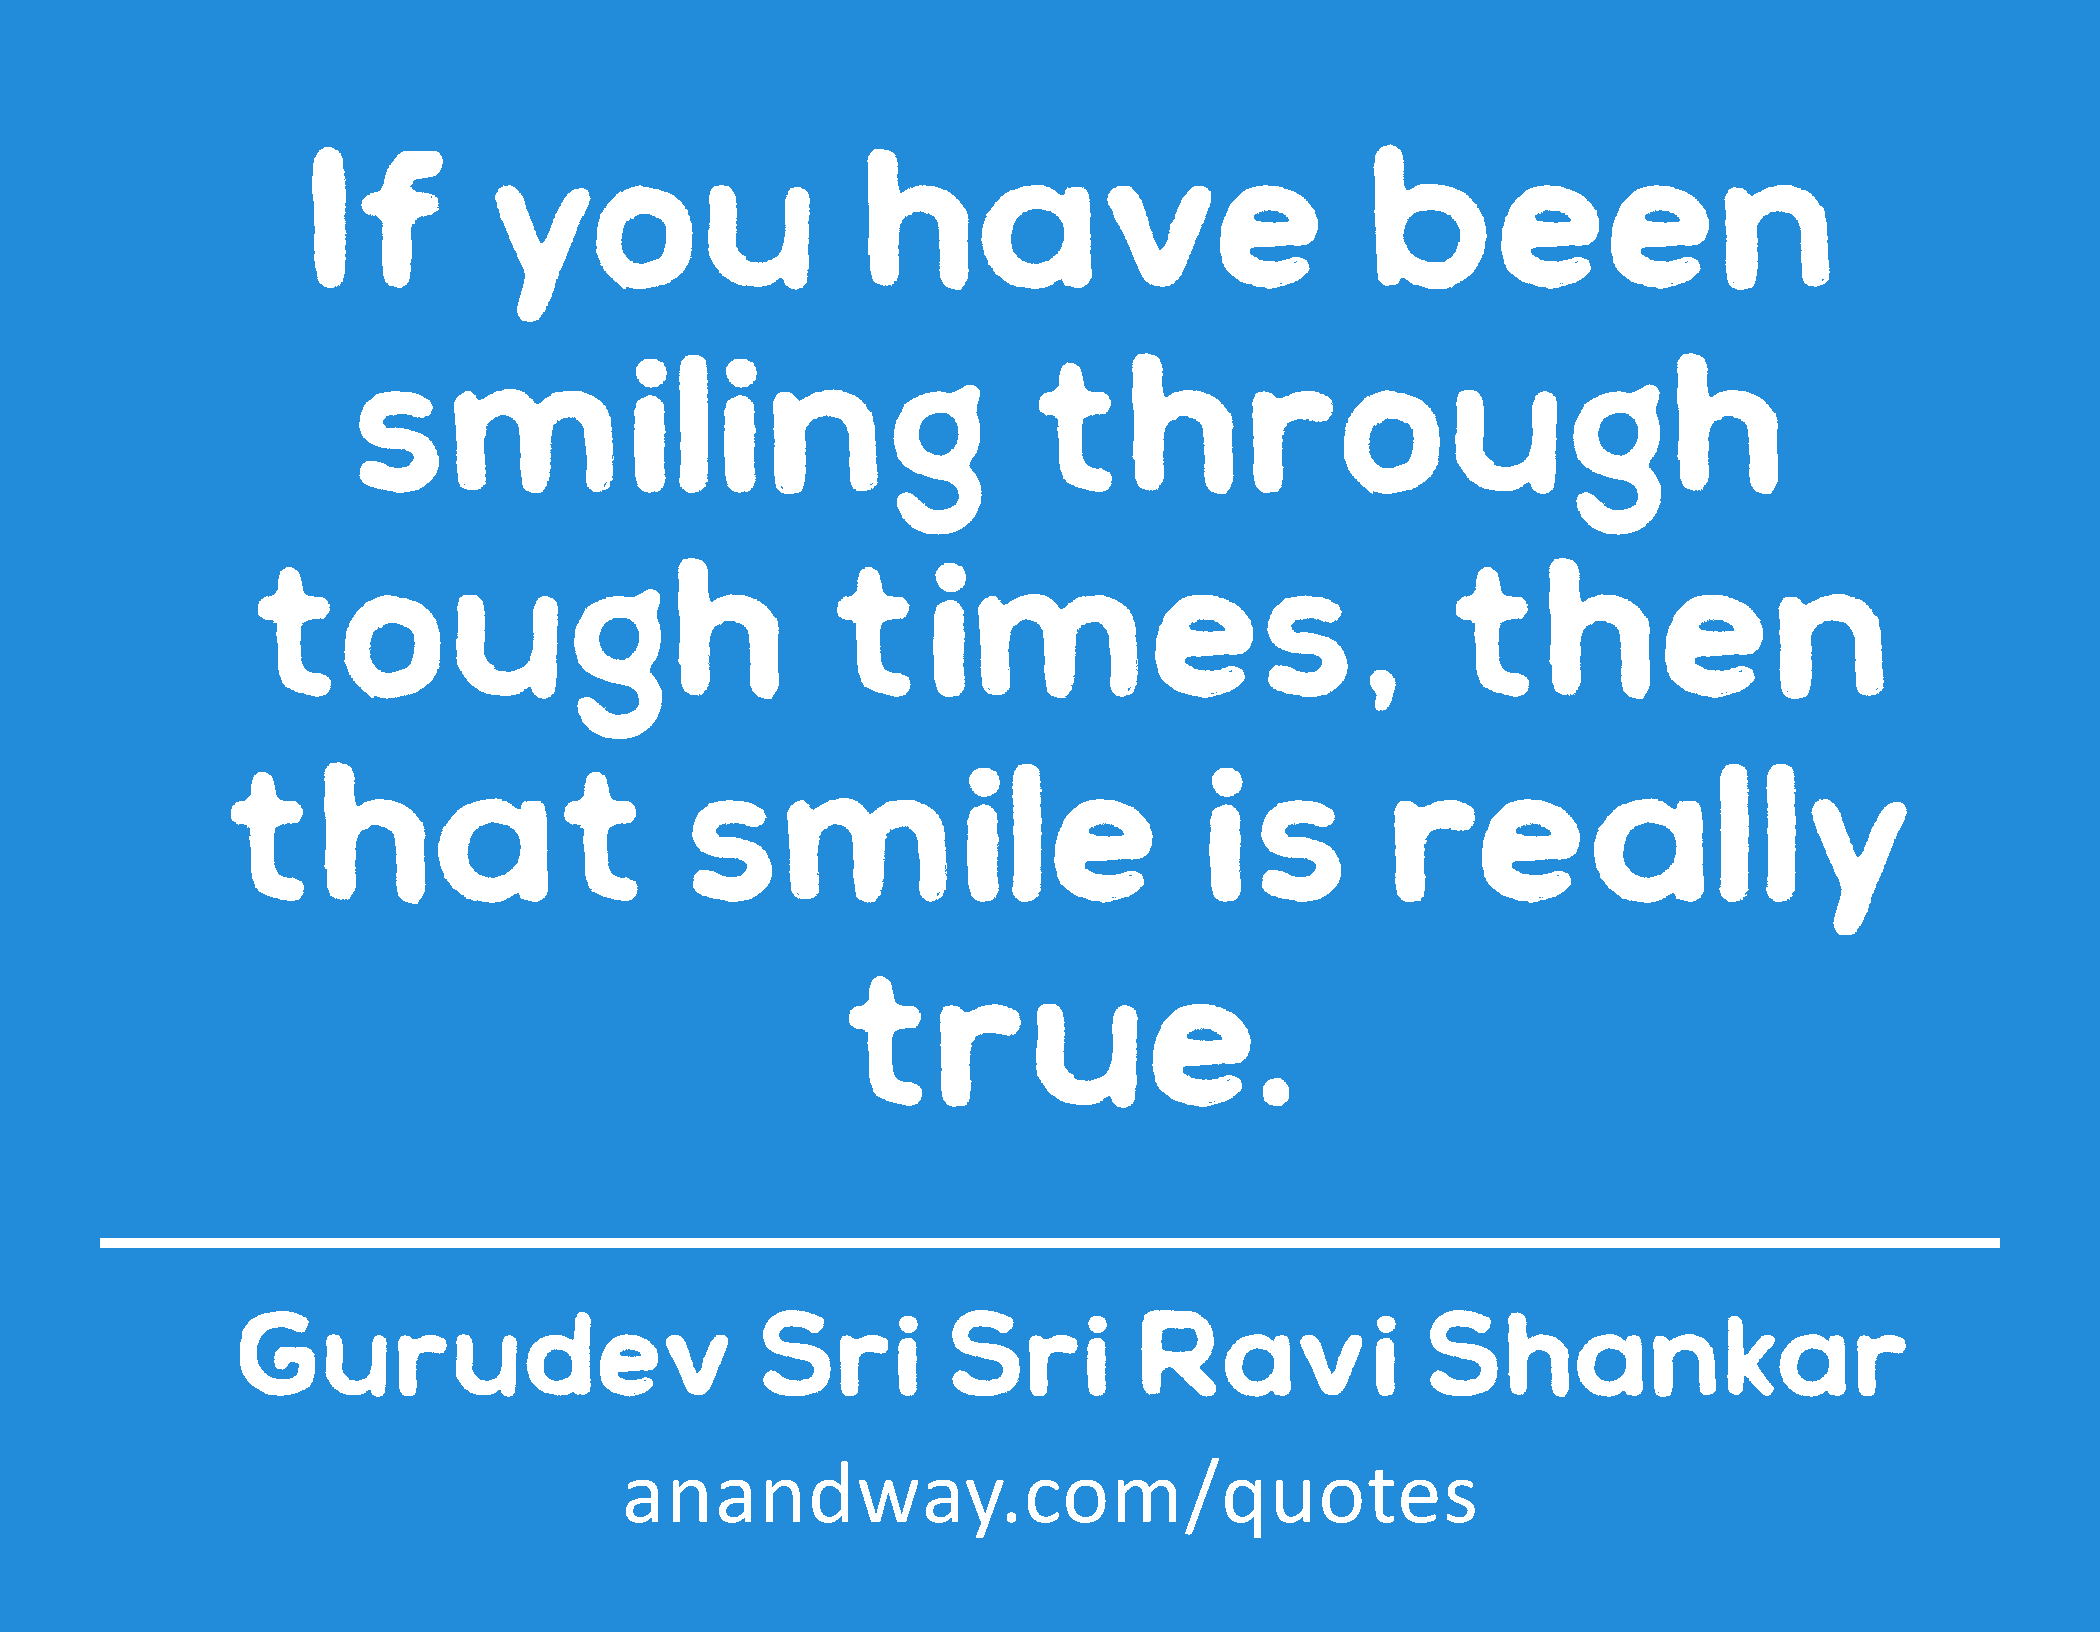 If you have been smiling through tough times, then that smile is really true. 
 -Gurudev Sri Sri Ravi Shankar